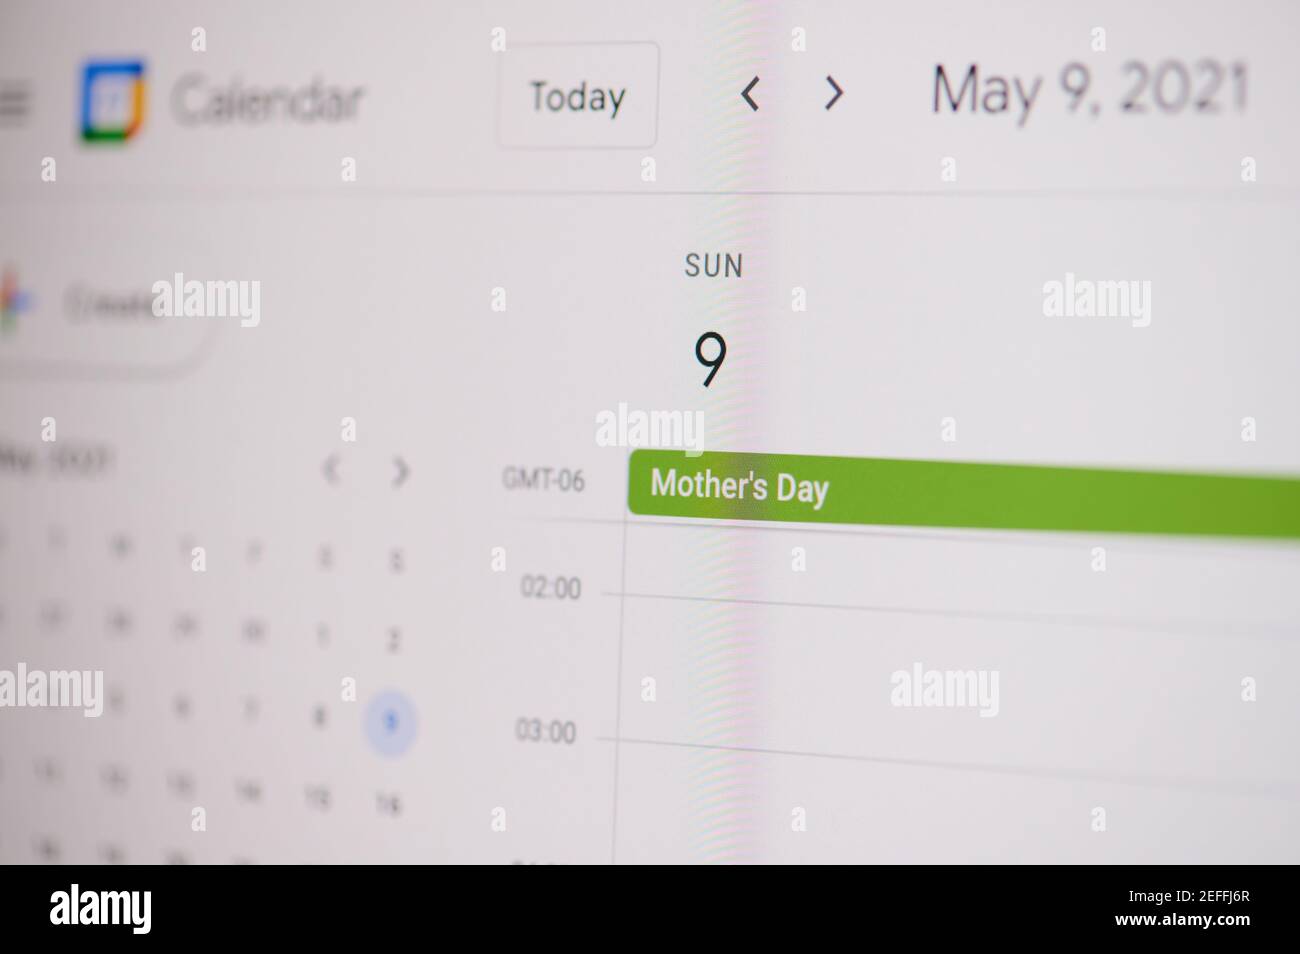 New york, USA - February 17, 2021: Mother day 9 of may  on google calendar on laptop screen close up view. Stock Photo